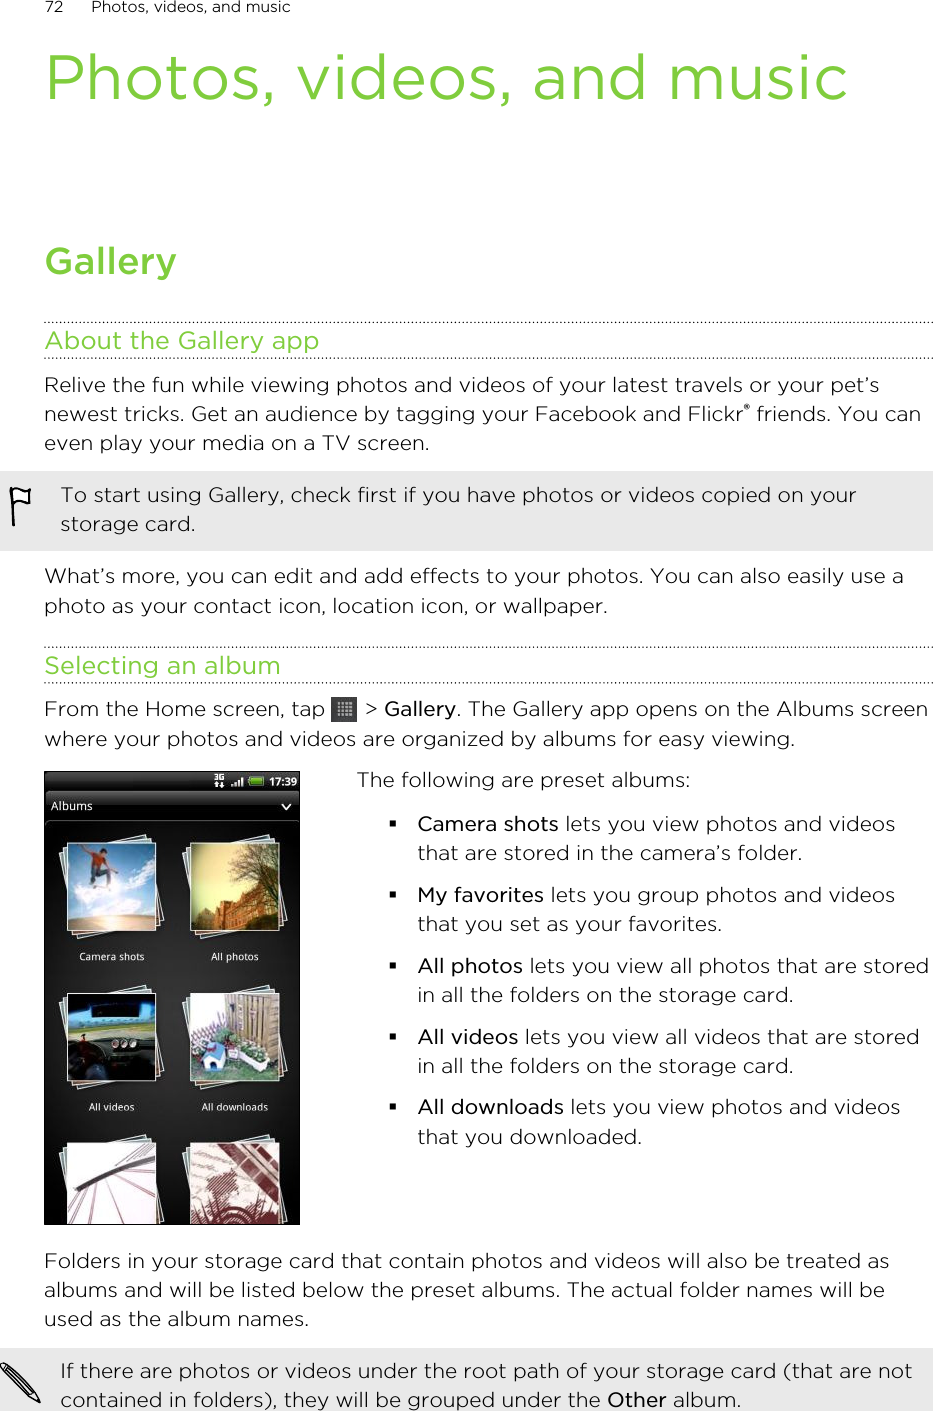 Photos, videos, and musicGalleryAbout the Gallery appRelive the fun while viewing photos and videos of your latest travels or your pet’snewest tricks. Get an audience by tagging your Facebook and Flickr® friends. You caneven play your media on a TV screen.To start using Gallery, check first if you have photos or videos copied on yourstorage card.What’s more, you can edit and add effects to your photos. You can also easily use aphoto as your contact icon, location icon, or wallpaper.Selecting an albumFrom the Home screen, tap   &gt; Gallery. The Gallery app opens on the Albums screenwhere your photos and videos are organized by albums for easy viewing.The following are preset albums:§Camera shots lets you view photos and videosthat are stored in the camera’s folder.§My favorites lets you group photos and videosthat you set as your favorites.§All photos lets you view all photos that are storedin all the folders on the storage card.§All videos lets you view all videos that are storedin all the folders on the storage card.§All downloads lets you view photos and videosthat you downloaded.Folders in your storage card that contain photos and videos will also be treated asalbums and will be listed below the preset albums. The actual folder names will beused as the album names.If there are photos or videos under the root path of your storage card (that are notcontained in folders), they will be grouped under the Other album.72 Photos, videos, and music